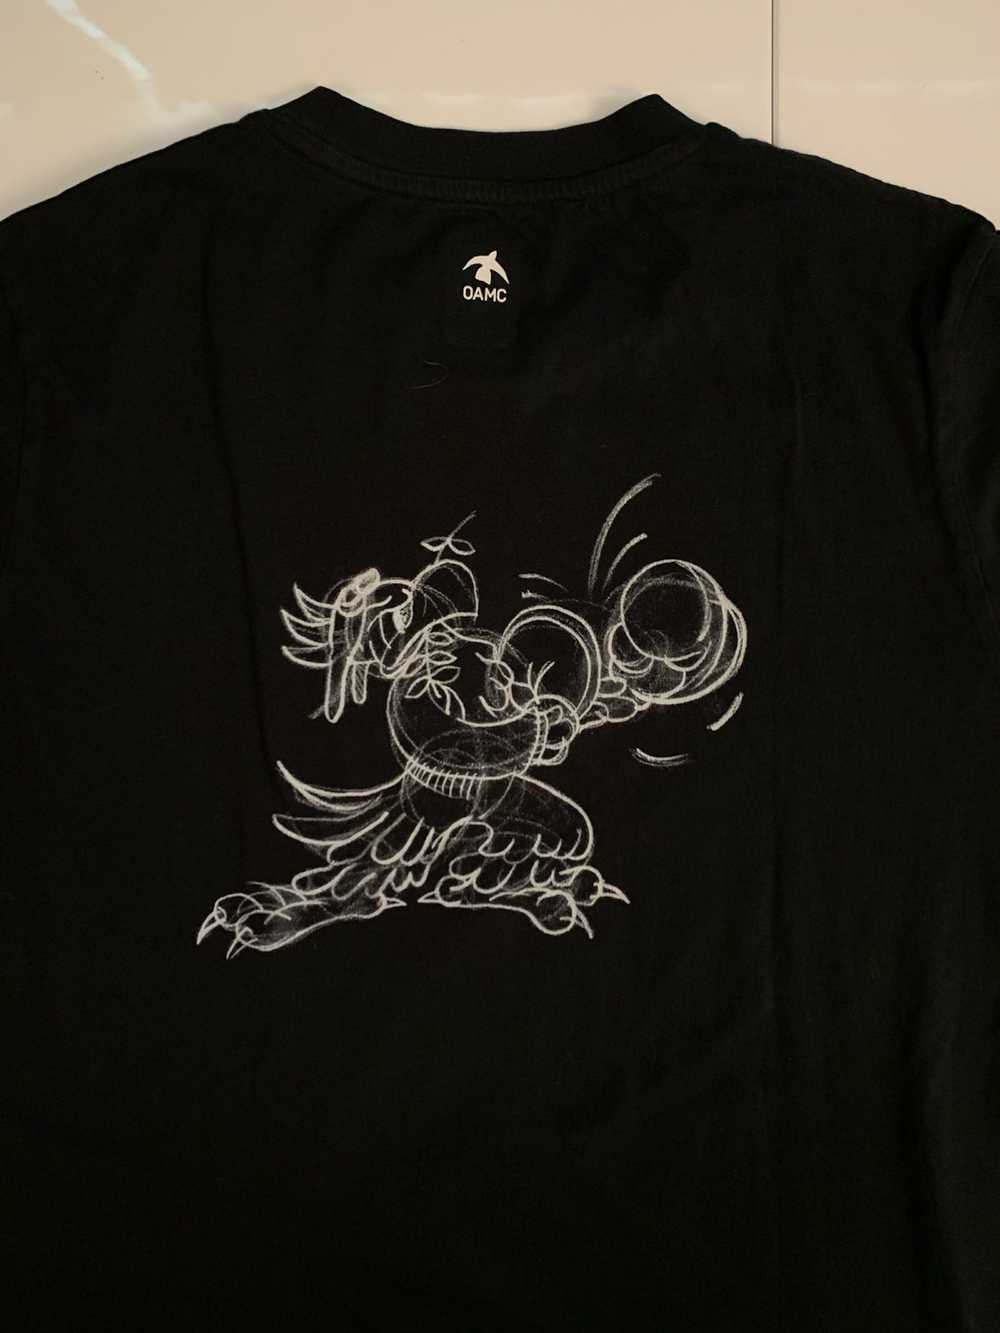 Oamc GREATEST VICTORY T SHIRT - image 3